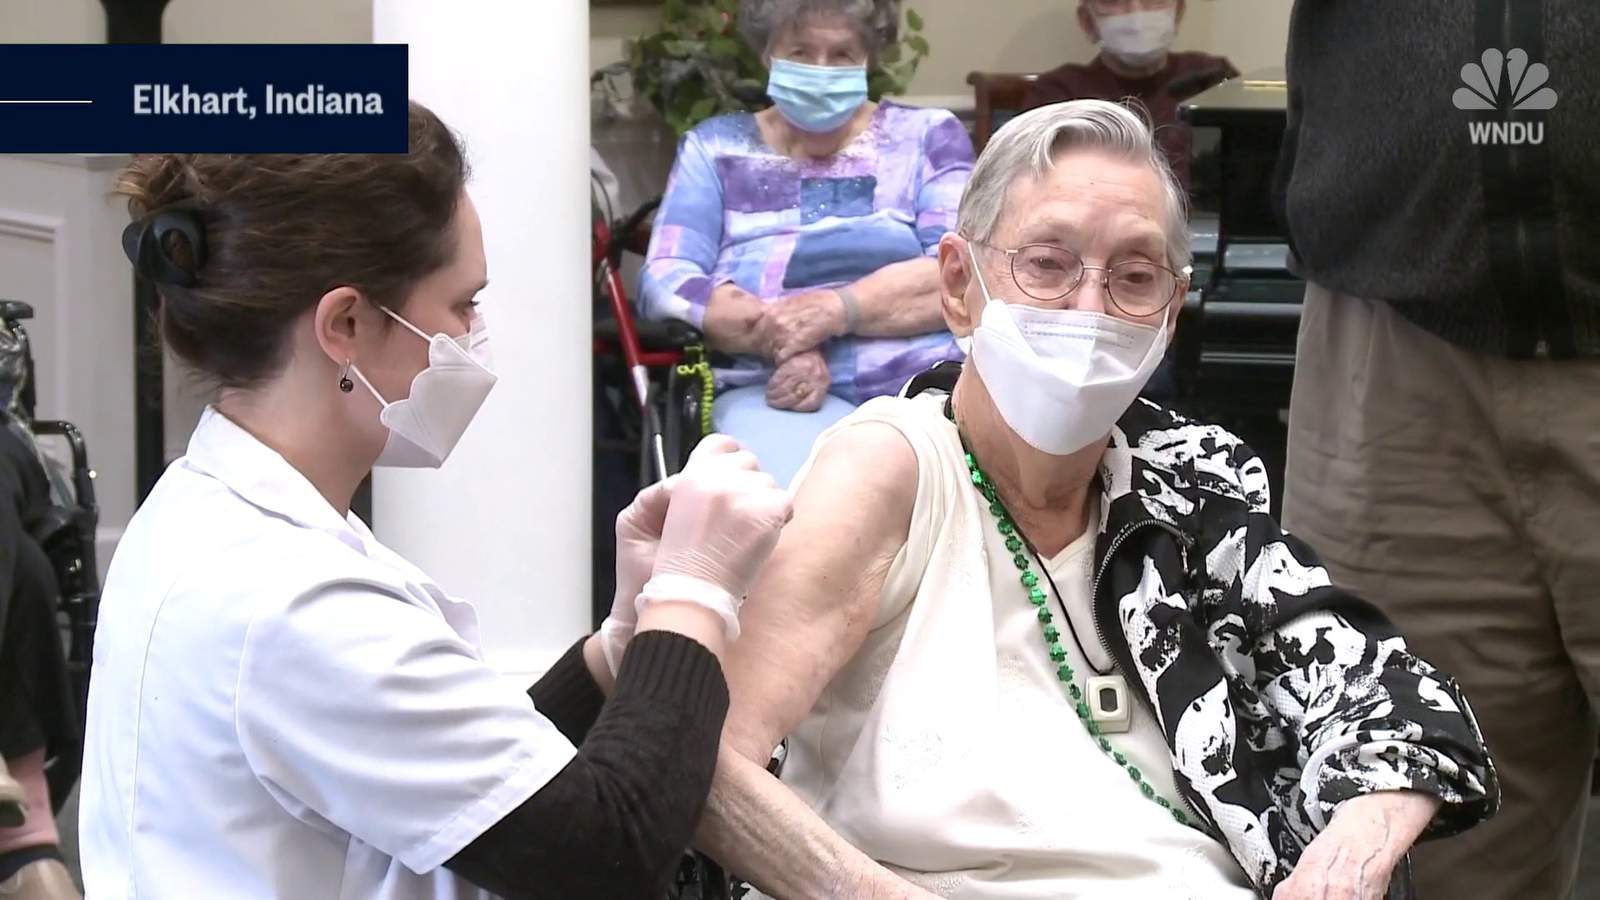 105-year-old Indiana woman who lived through 1917 Spanish flu survives second pandemic